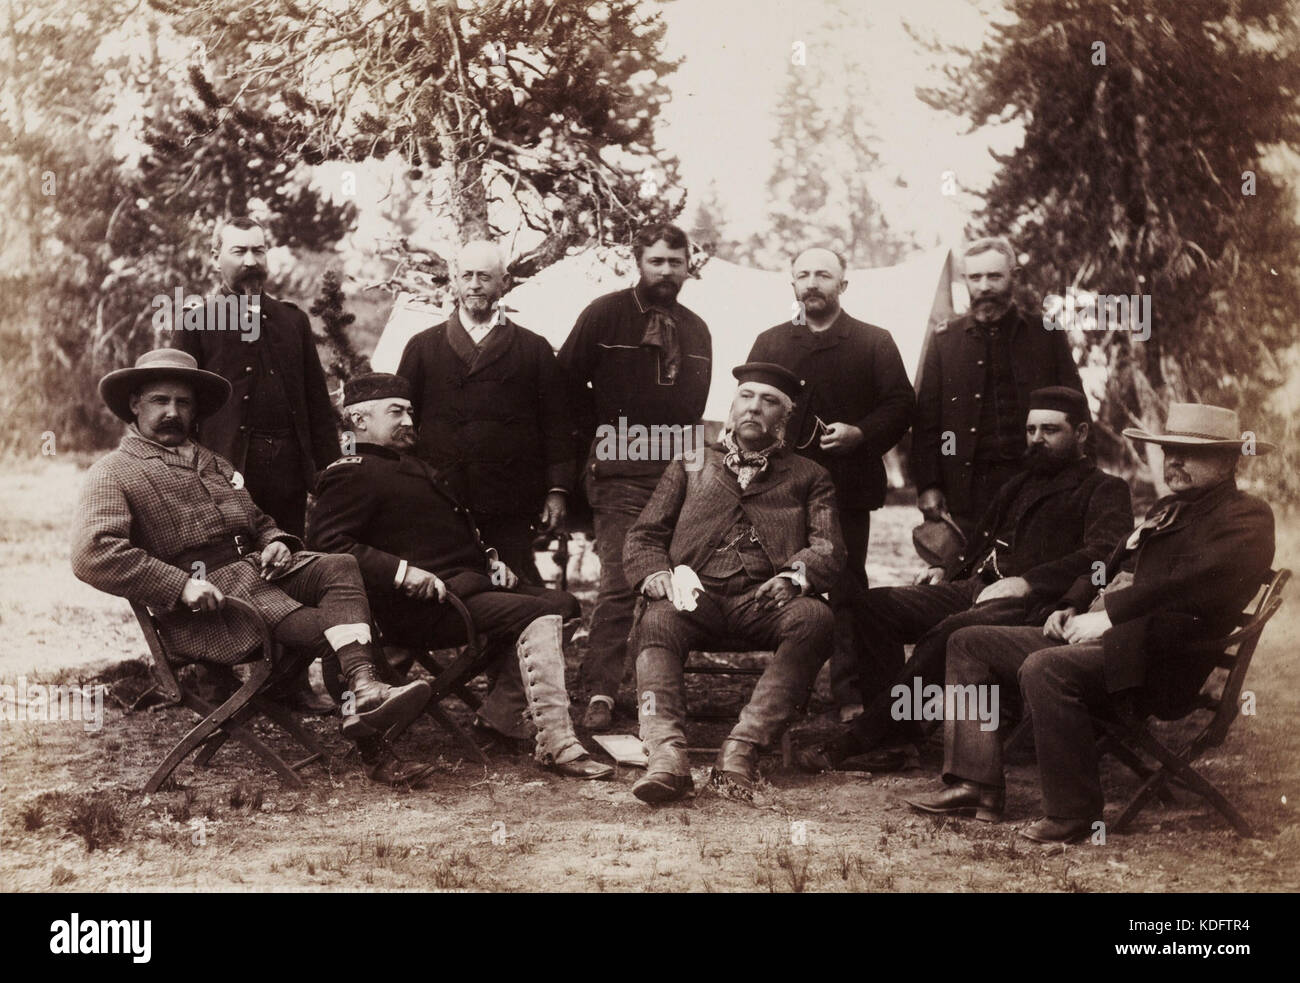 Präsident Chester A. Arthur Yellowstone National Park Expedition 1883 Stockfoto